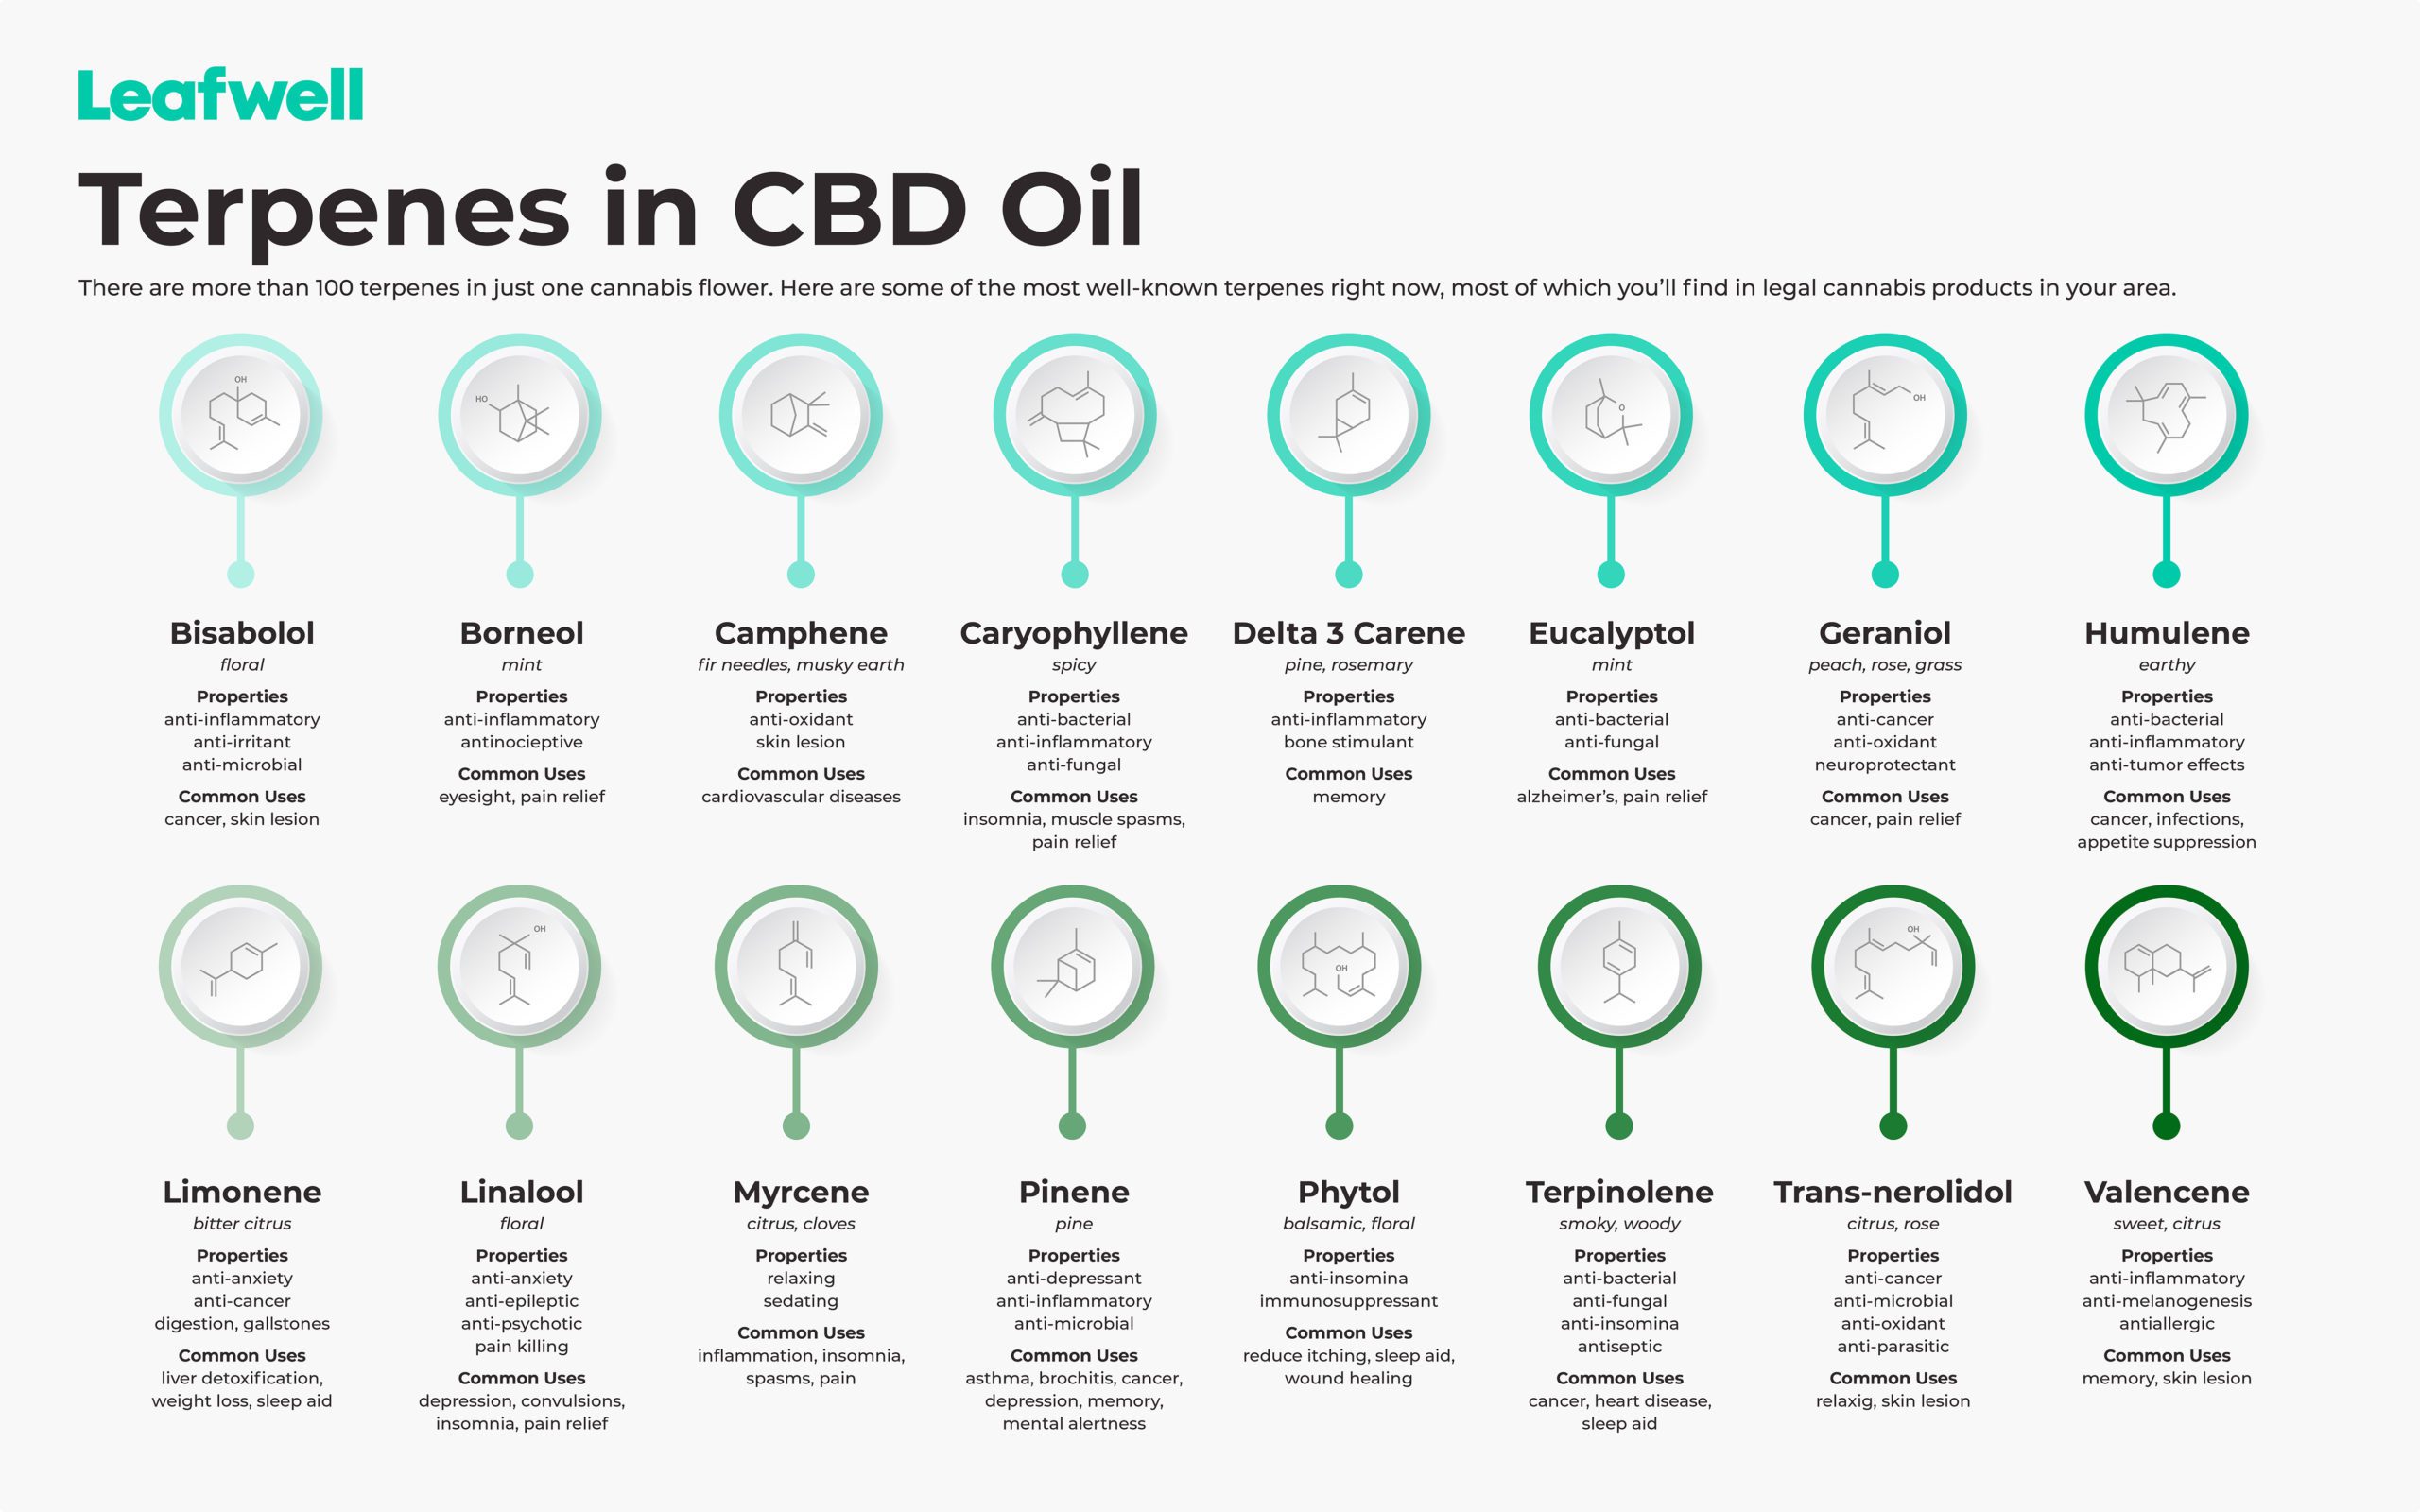 The terpenes found in CBD and cannabis oil, and what they do.